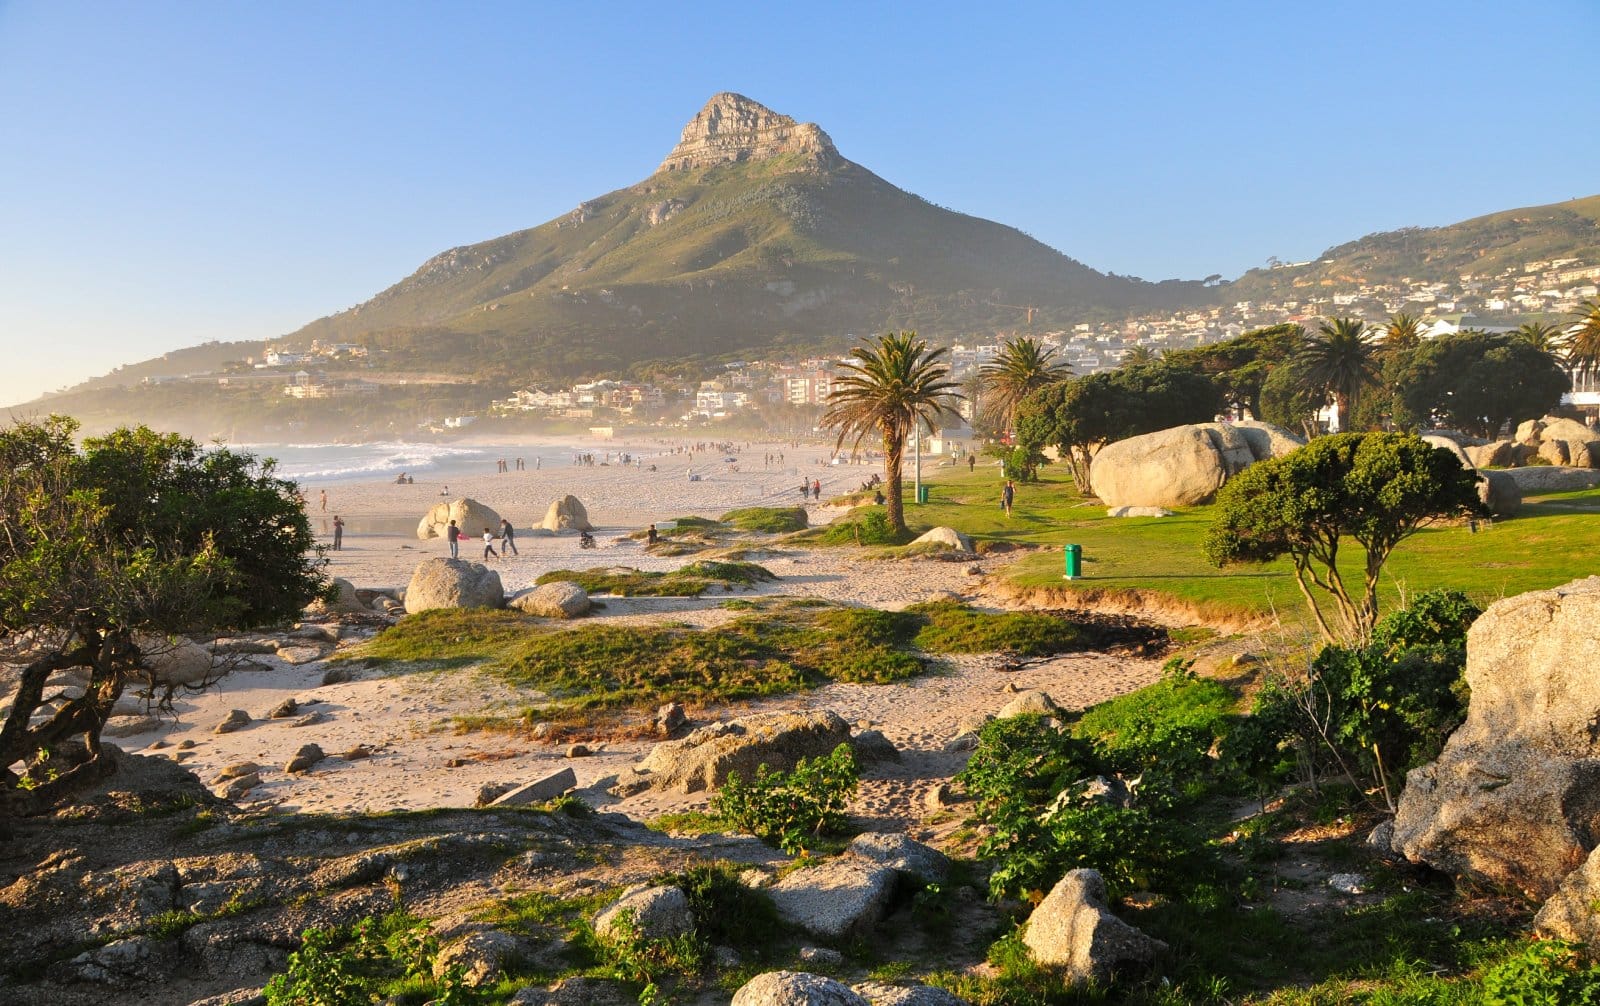 Image Credit: Shutterstock / Richard Cavalleri <p><span>Cape Town is a destination where natural beauty meets culinary delight, including for those following a plant-based diet. The city’s vegan and vegetarian scene is growing, with restaurants focusing on sustainable and ethical food practices. Cape Town’s rich cultural heritage influences its plant-based cuisine, offering a unique blend of flavors and dishes.</span></p> <p><b>Insider’s Tip: </b><span>Visit the Oranjezicht City Farm Market on a Saturday to sample vegan delicacies from local producers and enjoy the stunning views of Table Mountain.</span></p>